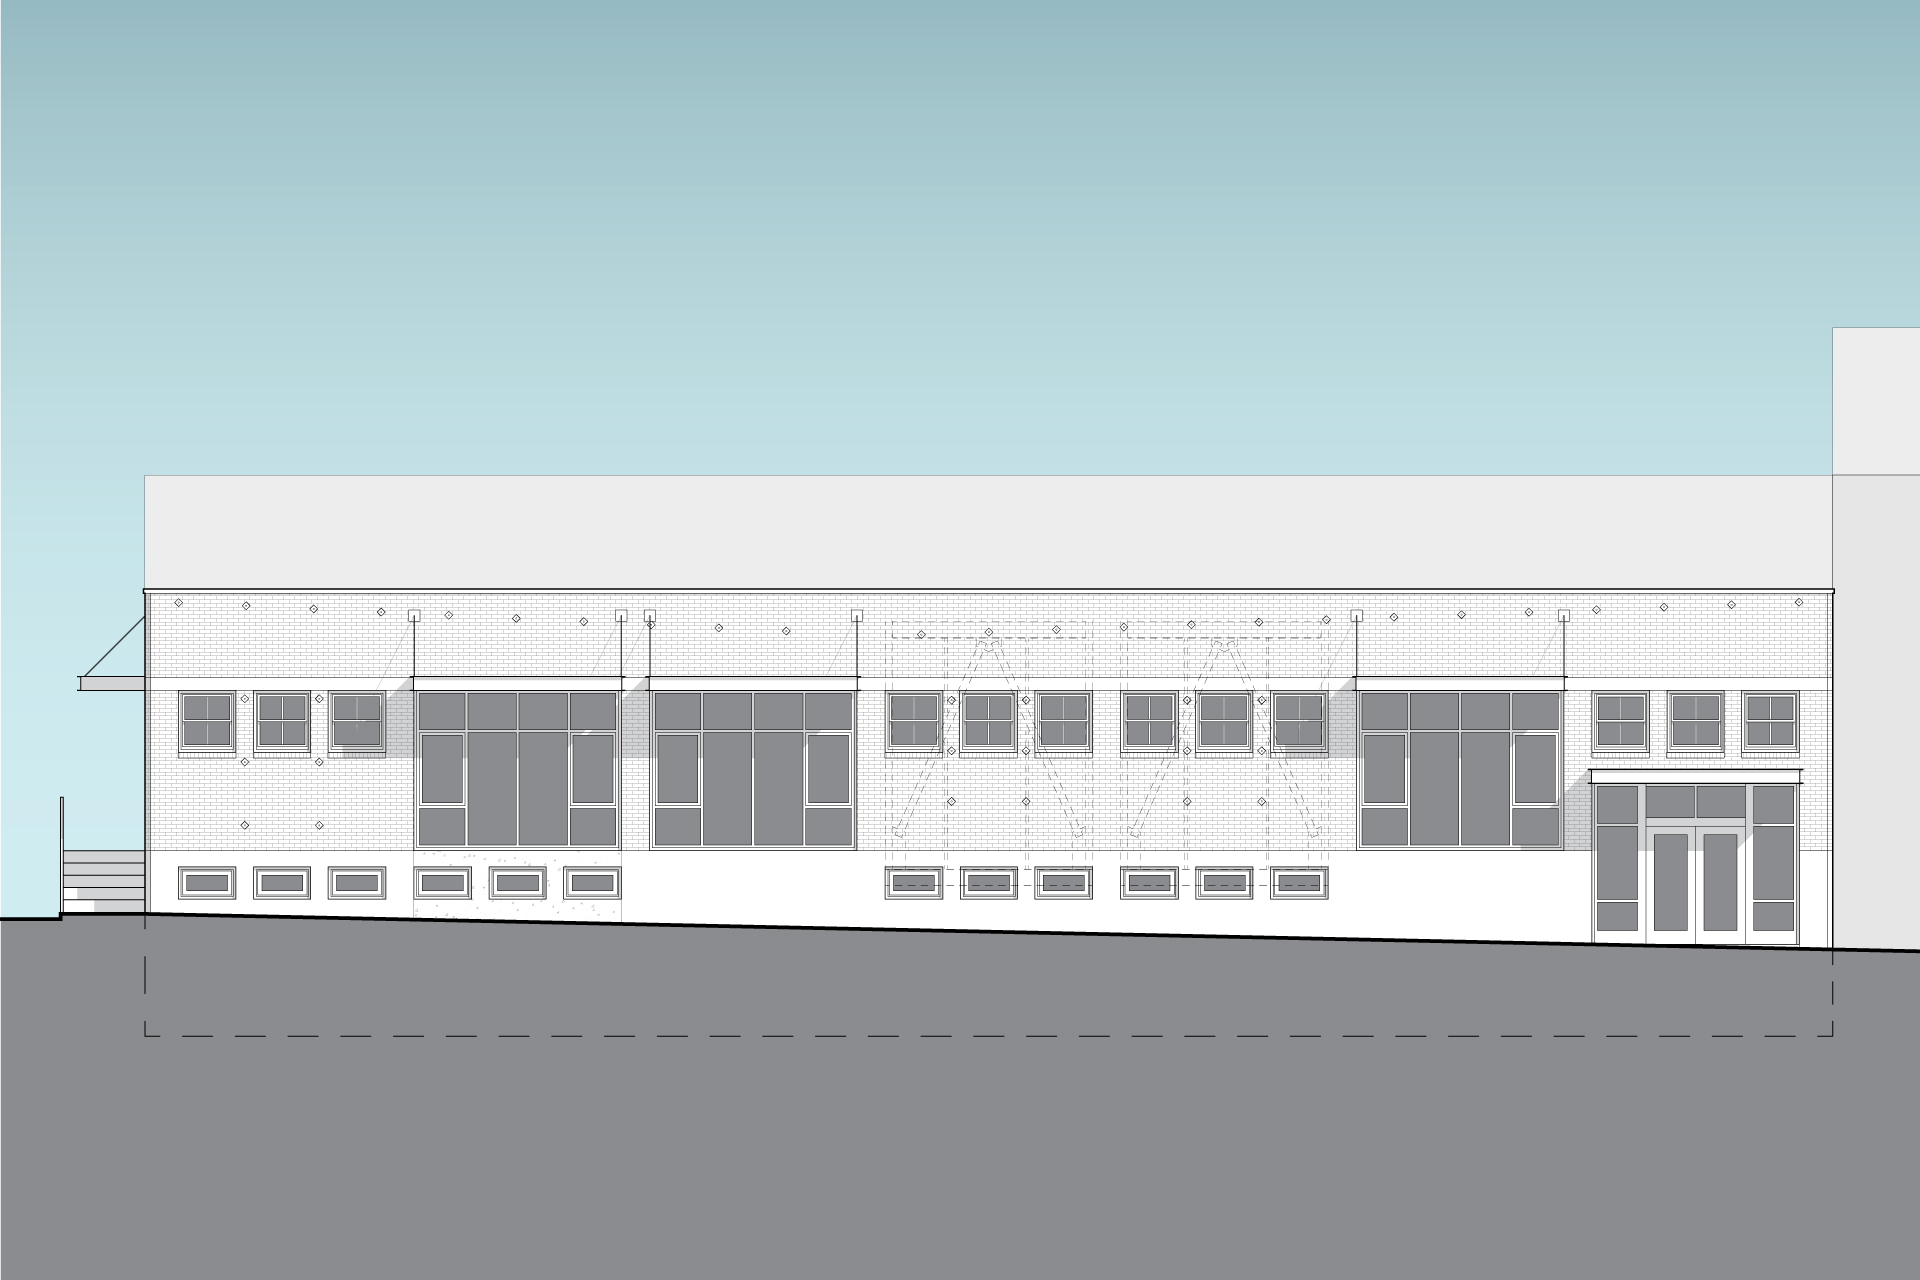 This is a drawing of the north elevation of the Taylor Building after renovations.